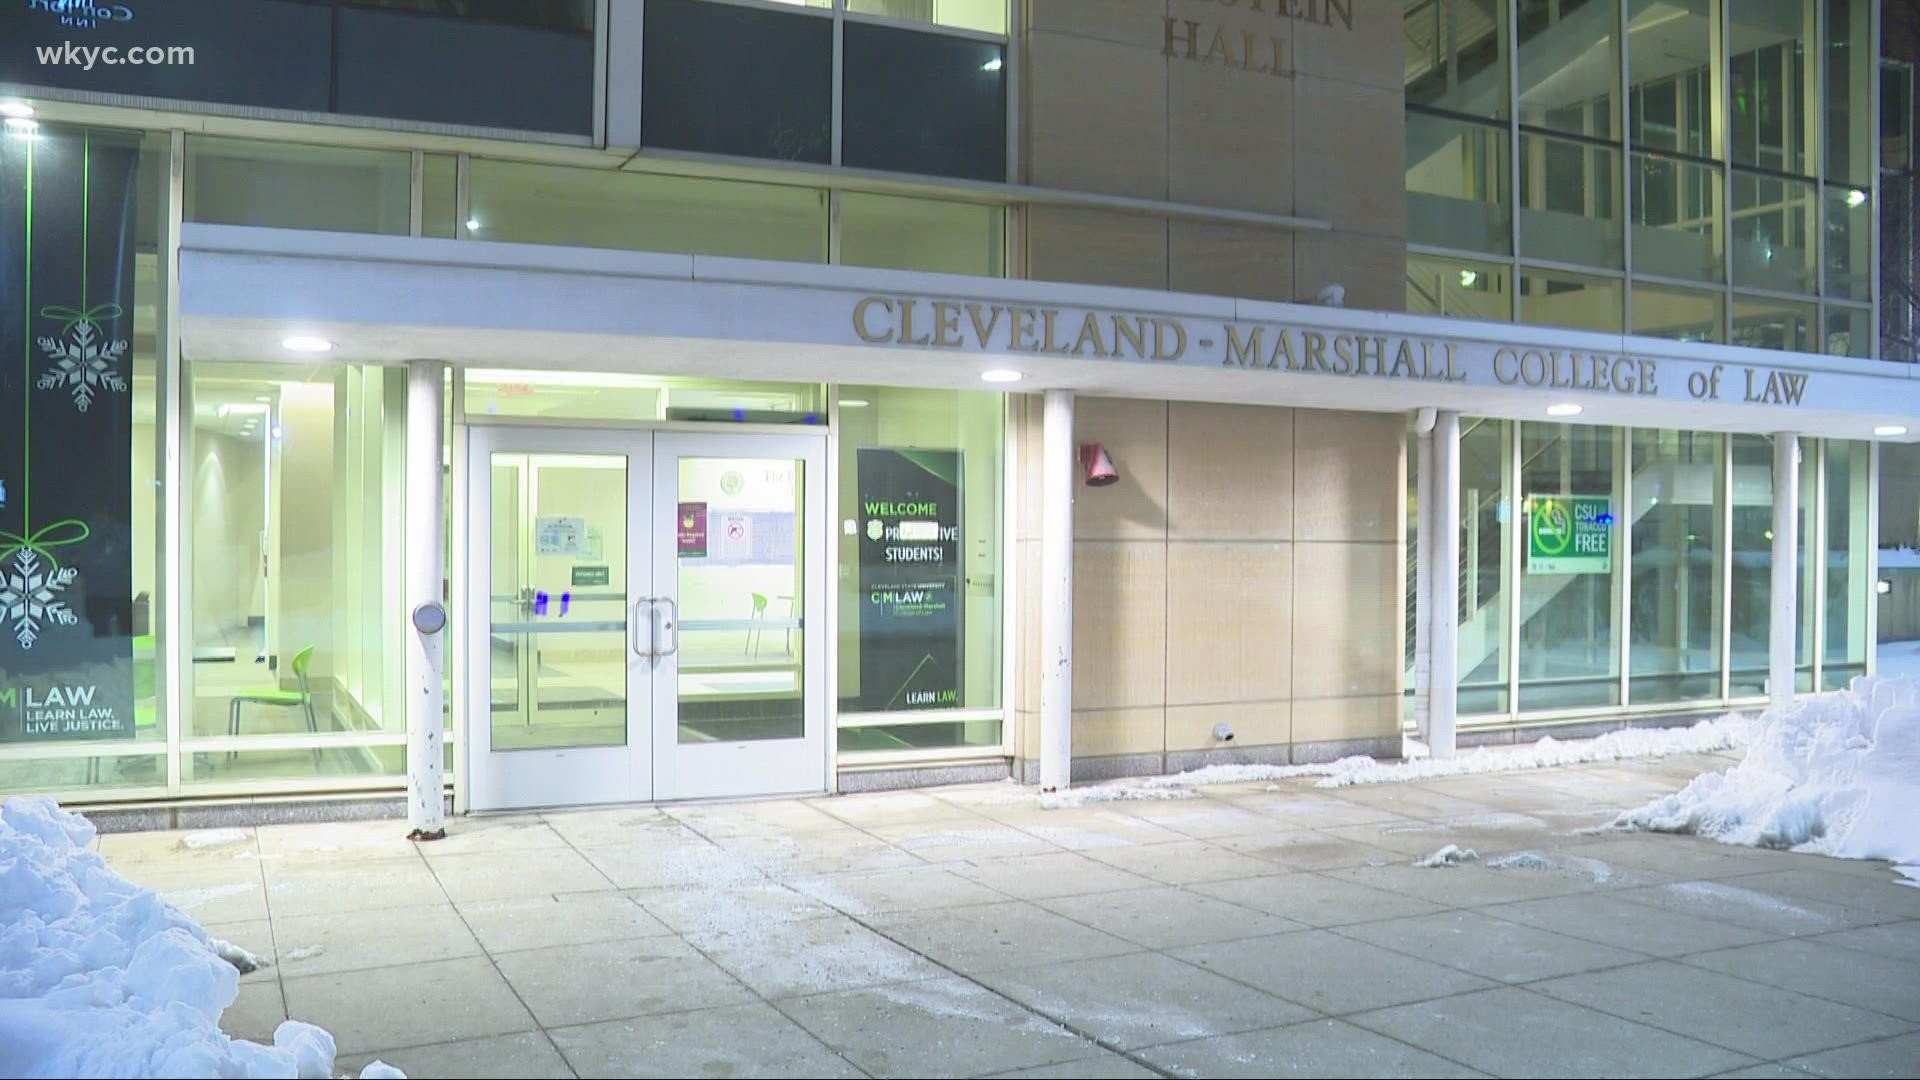 Cleveland City Council recently passed a resolution urging the university to rename the law school.